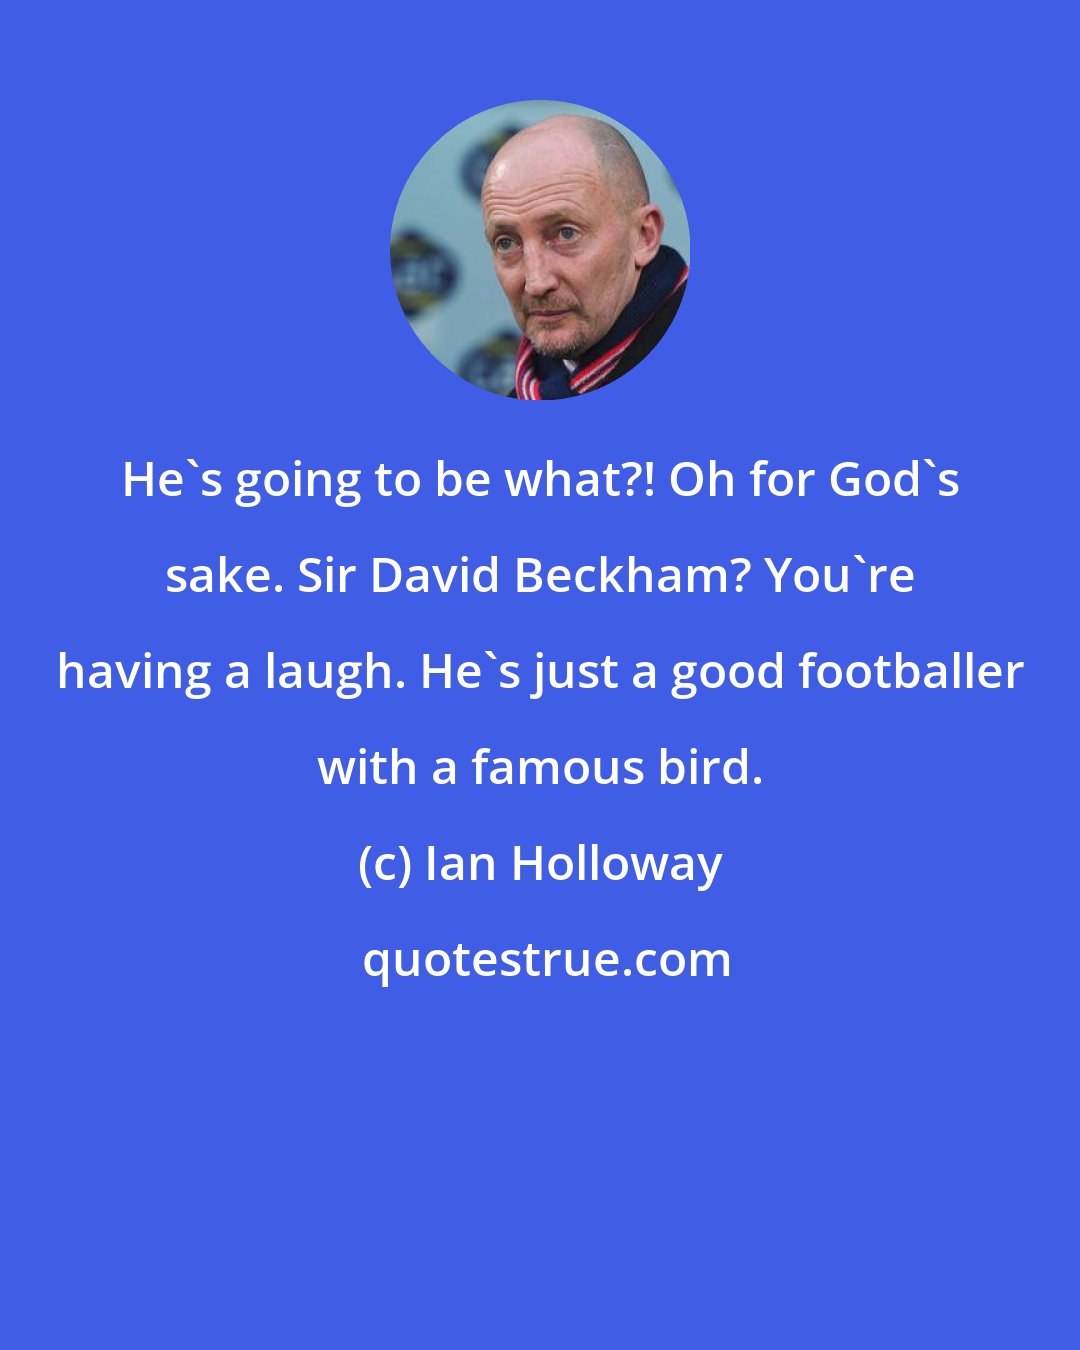 Ian Holloway: He's going to be what?! Oh for God's sake. Sir David Beckham? You're having a laugh. He's just a good footballer with a famous bird.